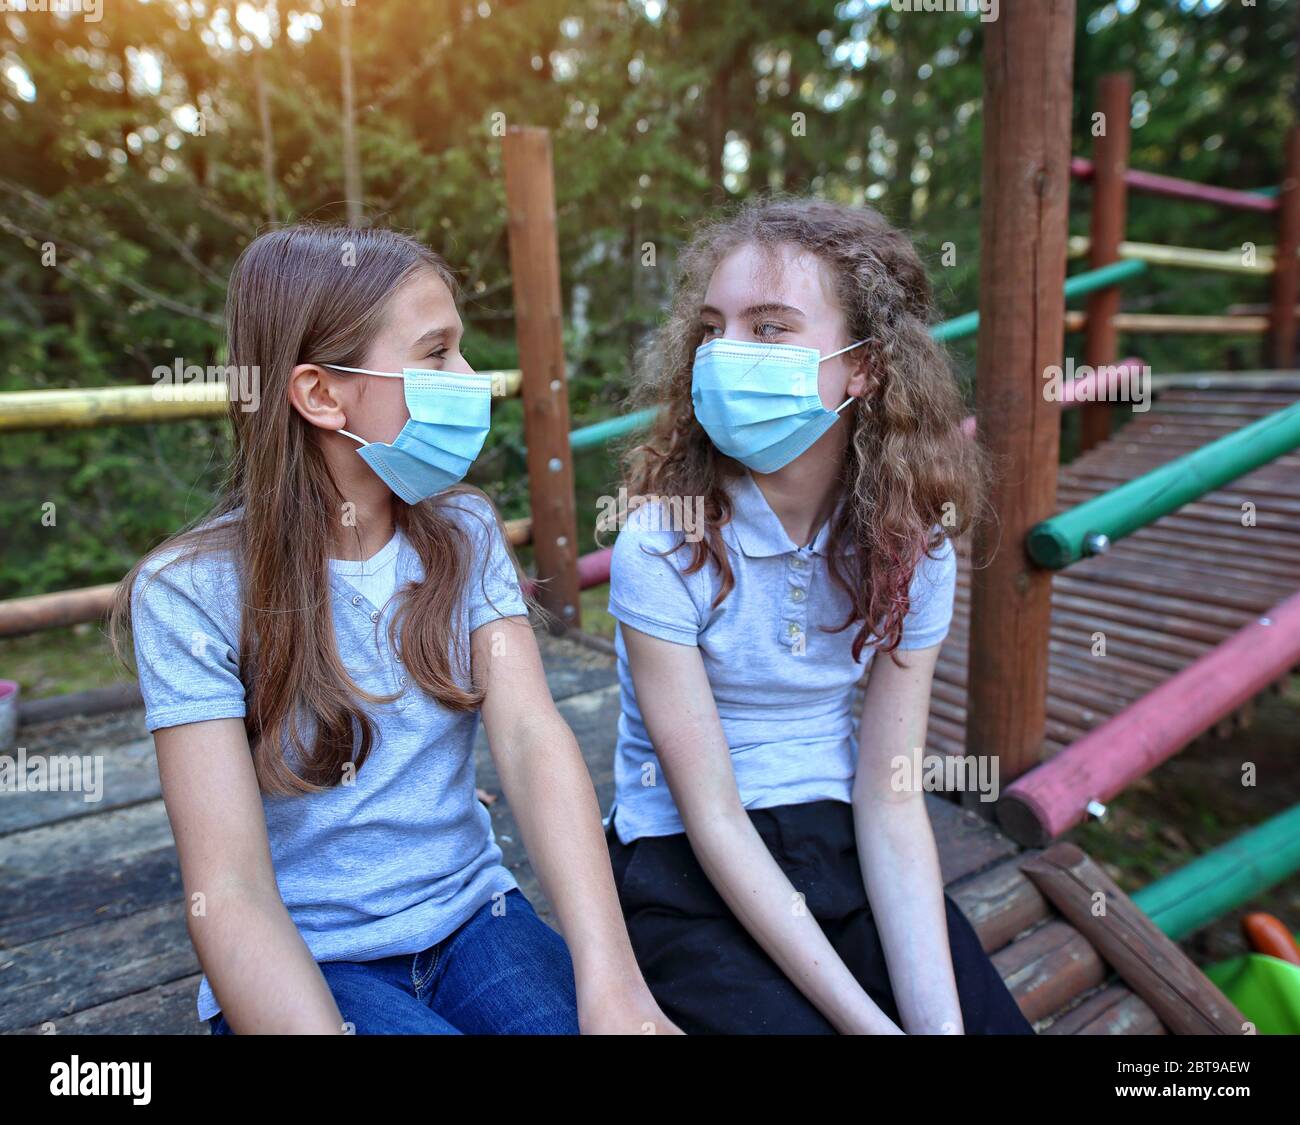 Young girl friends laugh and talk during the coronavirus plague outside Stock Photo